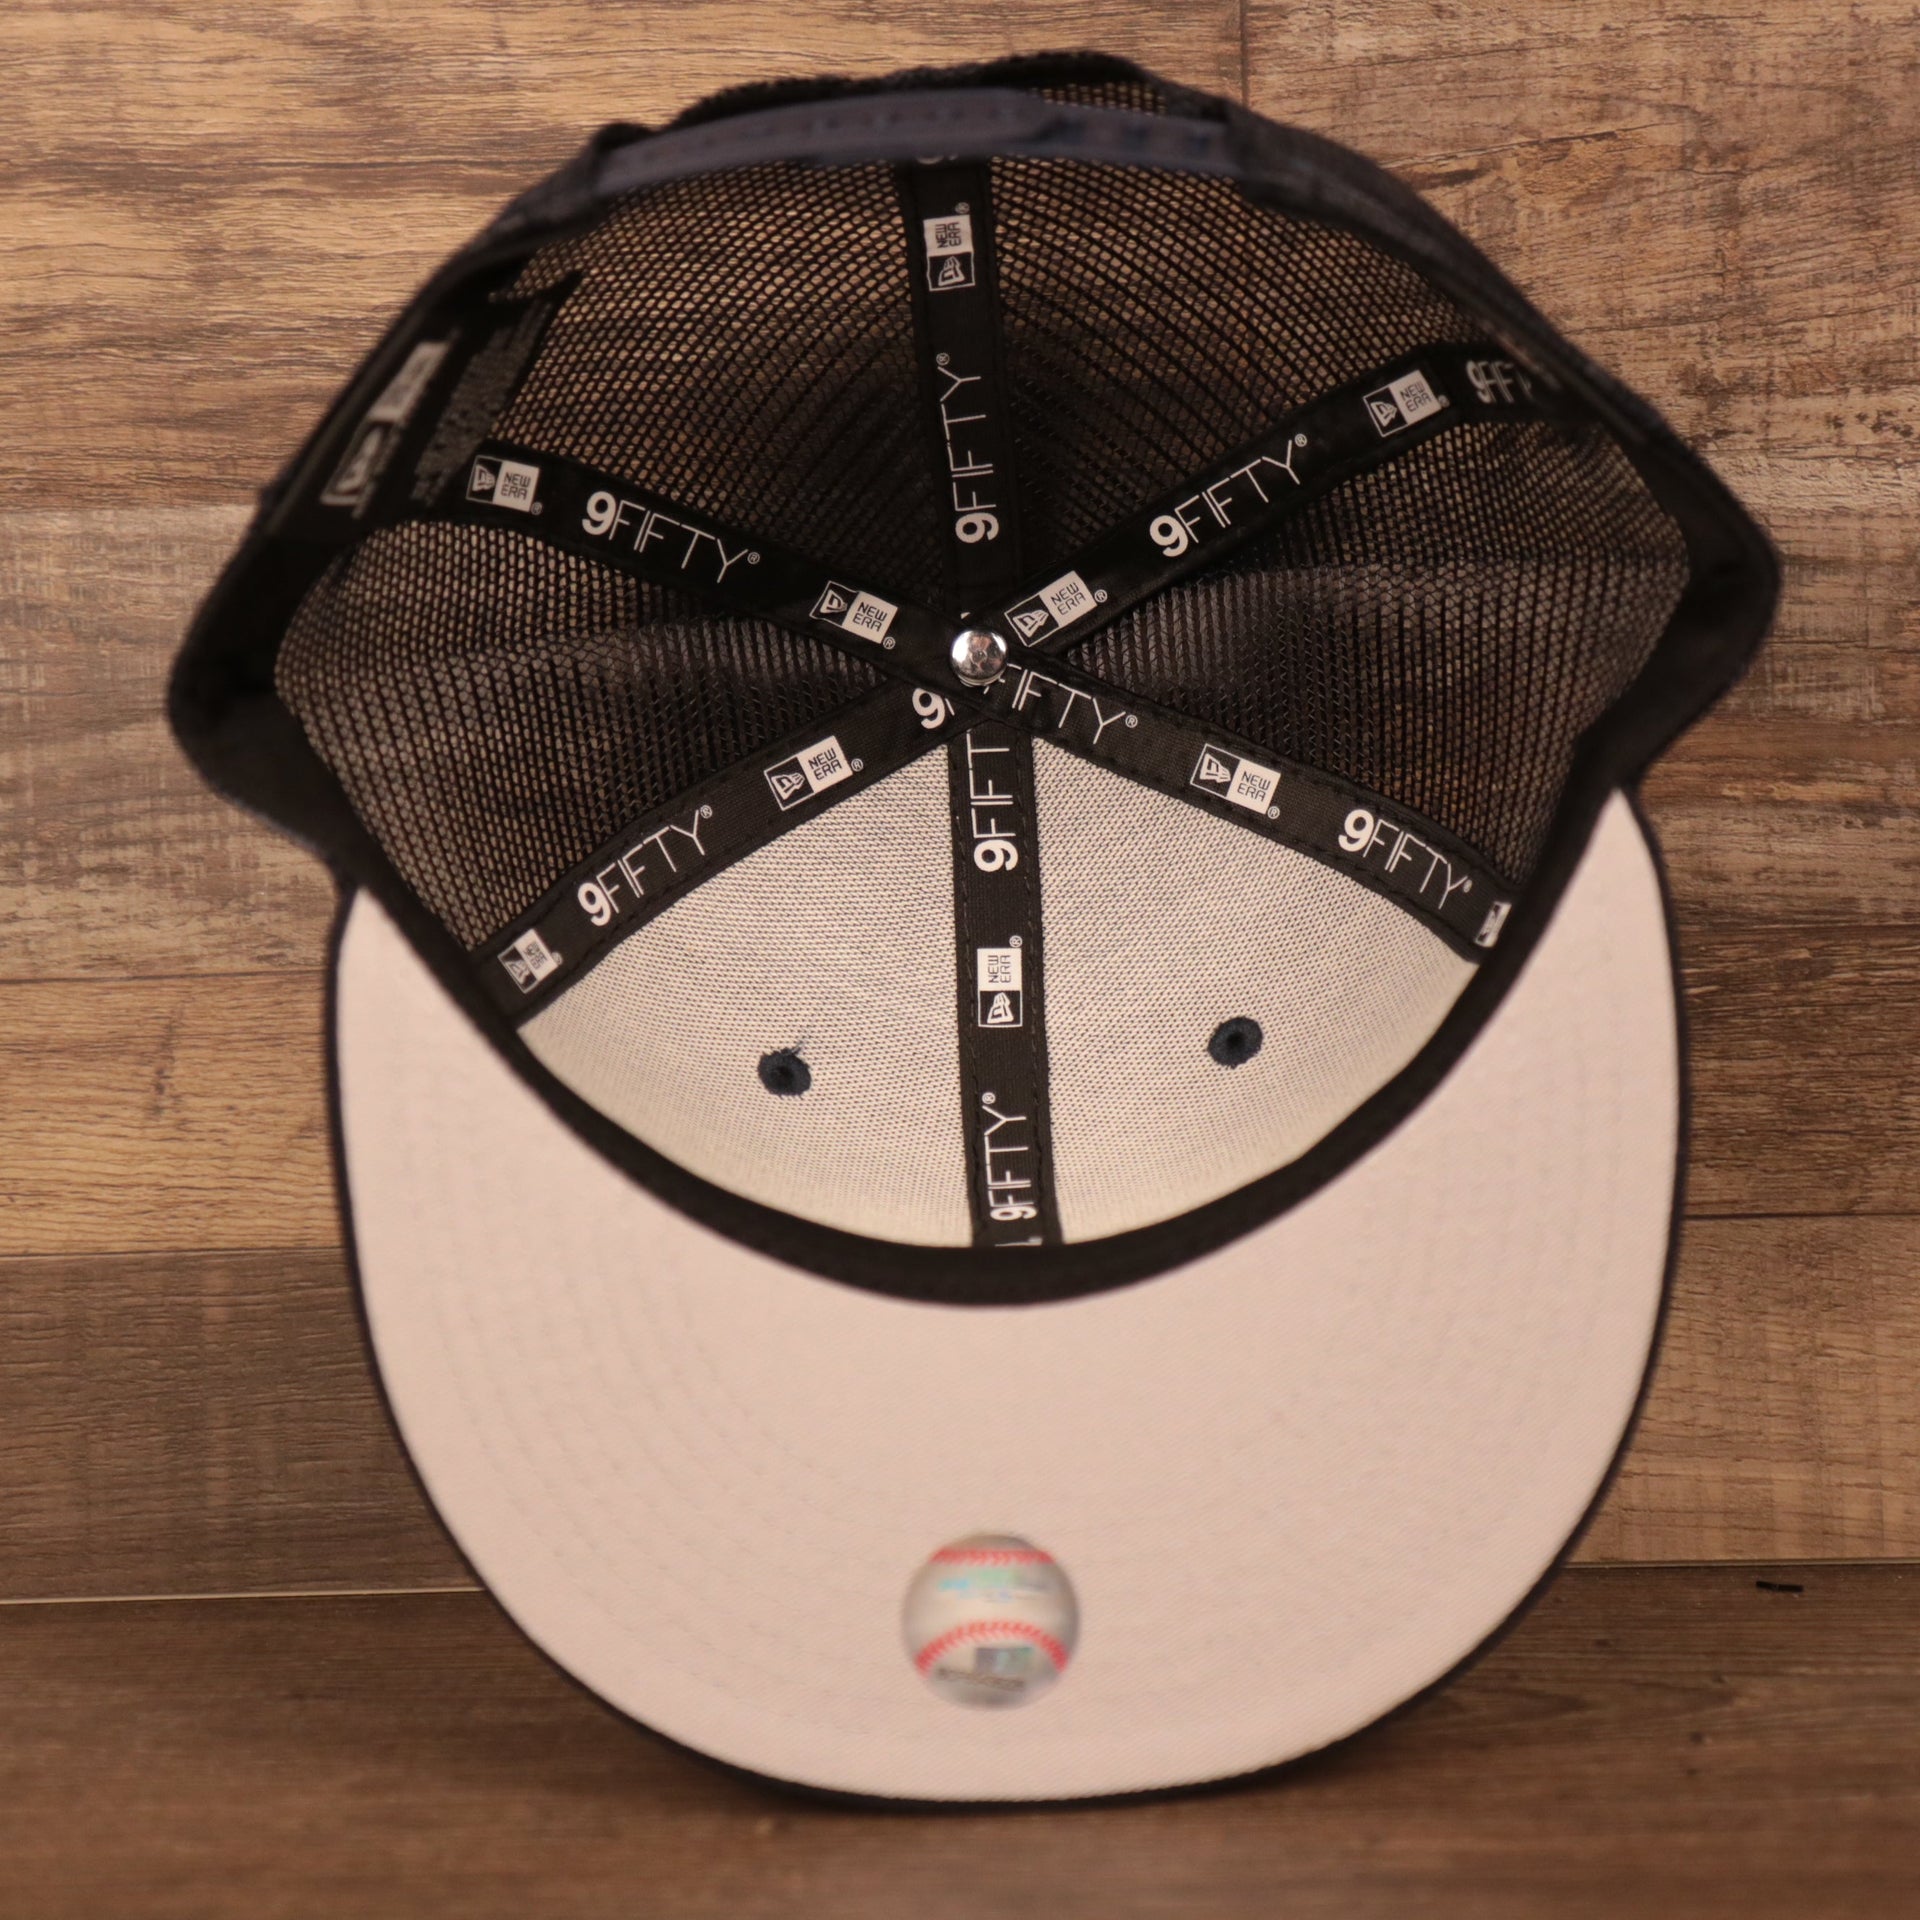 An inside look of the gray bottom brim mesh snapback hat for the Yanks.